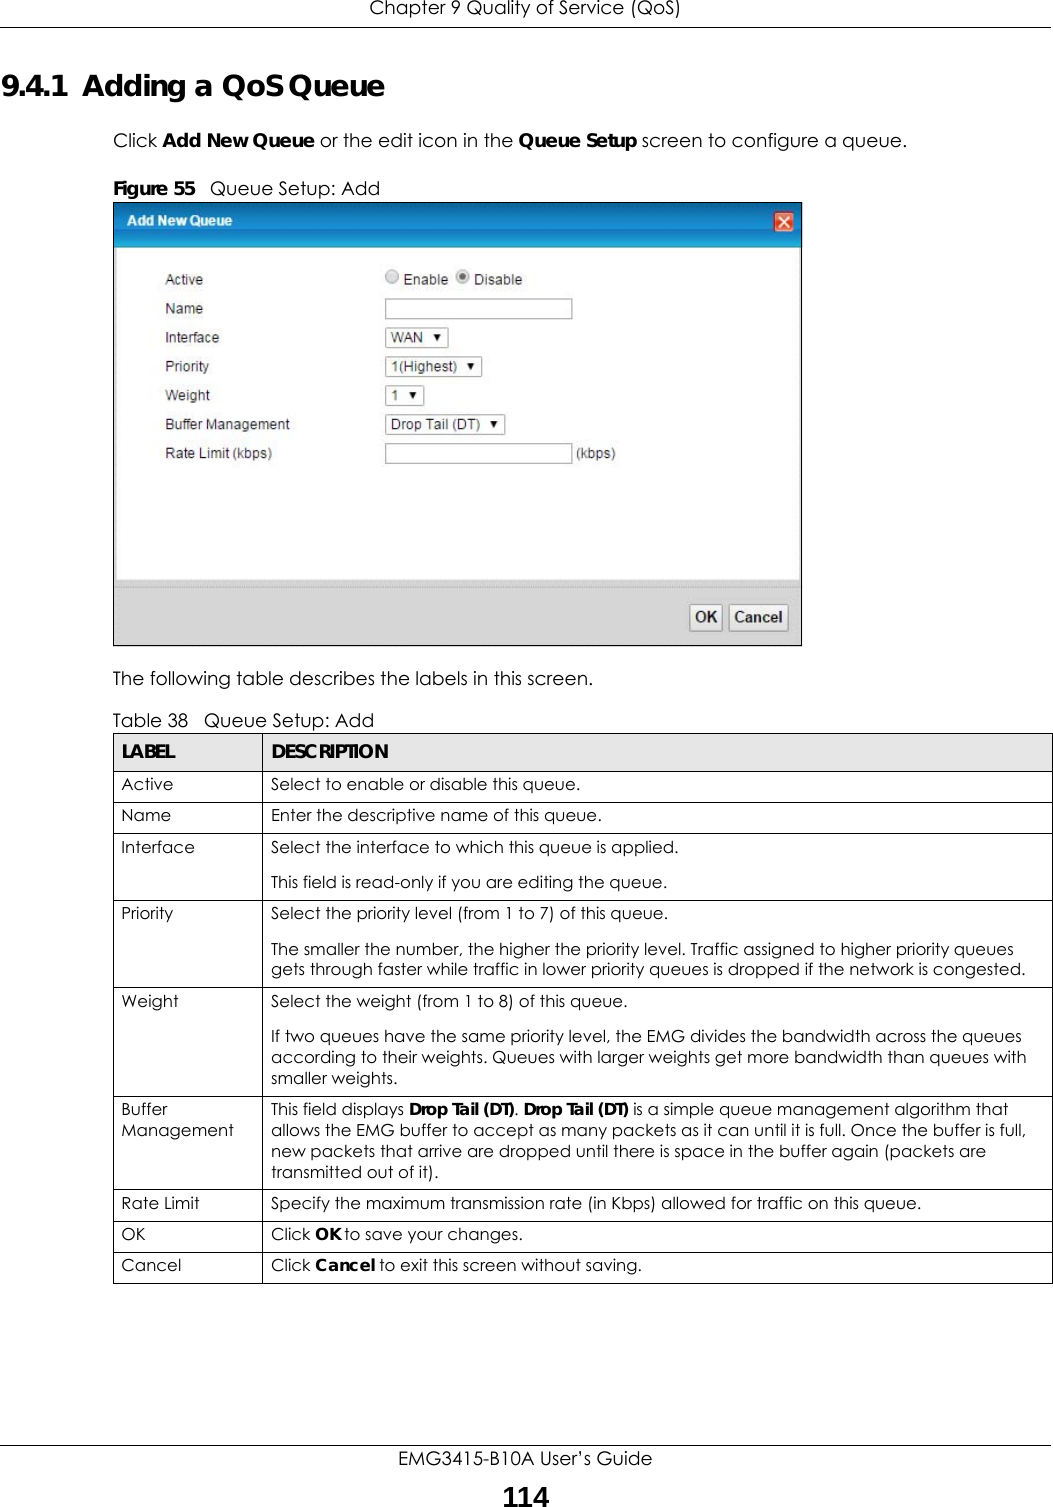 Chapter 9 Quality of Service (QoS)EMG3415-B10A User’s Guide1149.4.1  Adding a QoS Queue Click Add New Queue or the edit icon in the Queue Setup screen to configure a queue. Figure 55   Queue Setup: Add The following table describes the labels in this screen.  Table 38   Queue Setup: AddLABEL DESCRIPTIONActive Select to enable or disable this queue.Name Enter the descriptive name of this queue.Interface Select the interface to which this queue is applied.This field is read-only if you are editing the queue.Priority Select the priority level (from 1 to 7) of this queue.The smaller the number, the higher the priority level. Traffic assigned to higher priority queues gets through faster while traffic in lower priority queues is dropped if the network is congested.Weight Select the weight (from 1 to 8) of this queue. If two queues have the same priority level, the EMG divides the bandwidth across the queues according to their weights. Queues with larger weights get more bandwidth than queues with smaller weights.Buffer ManagementThis field displays Drop Tail (DT). Drop Tail (DT) is a simple queue management algorithm that allows the EMG buffer to accept as many packets as it can until it is full. Once the buffer is full, new packets that arrive are dropped until there is space in the buffer again (packets are transmitted out of it). Rate Limit Specify the maximum transmission rate (in Kbps) allowed for traffic on this queue.OK Click OK to save your changes.Cancel Click Cancel to exit this screen without saving.